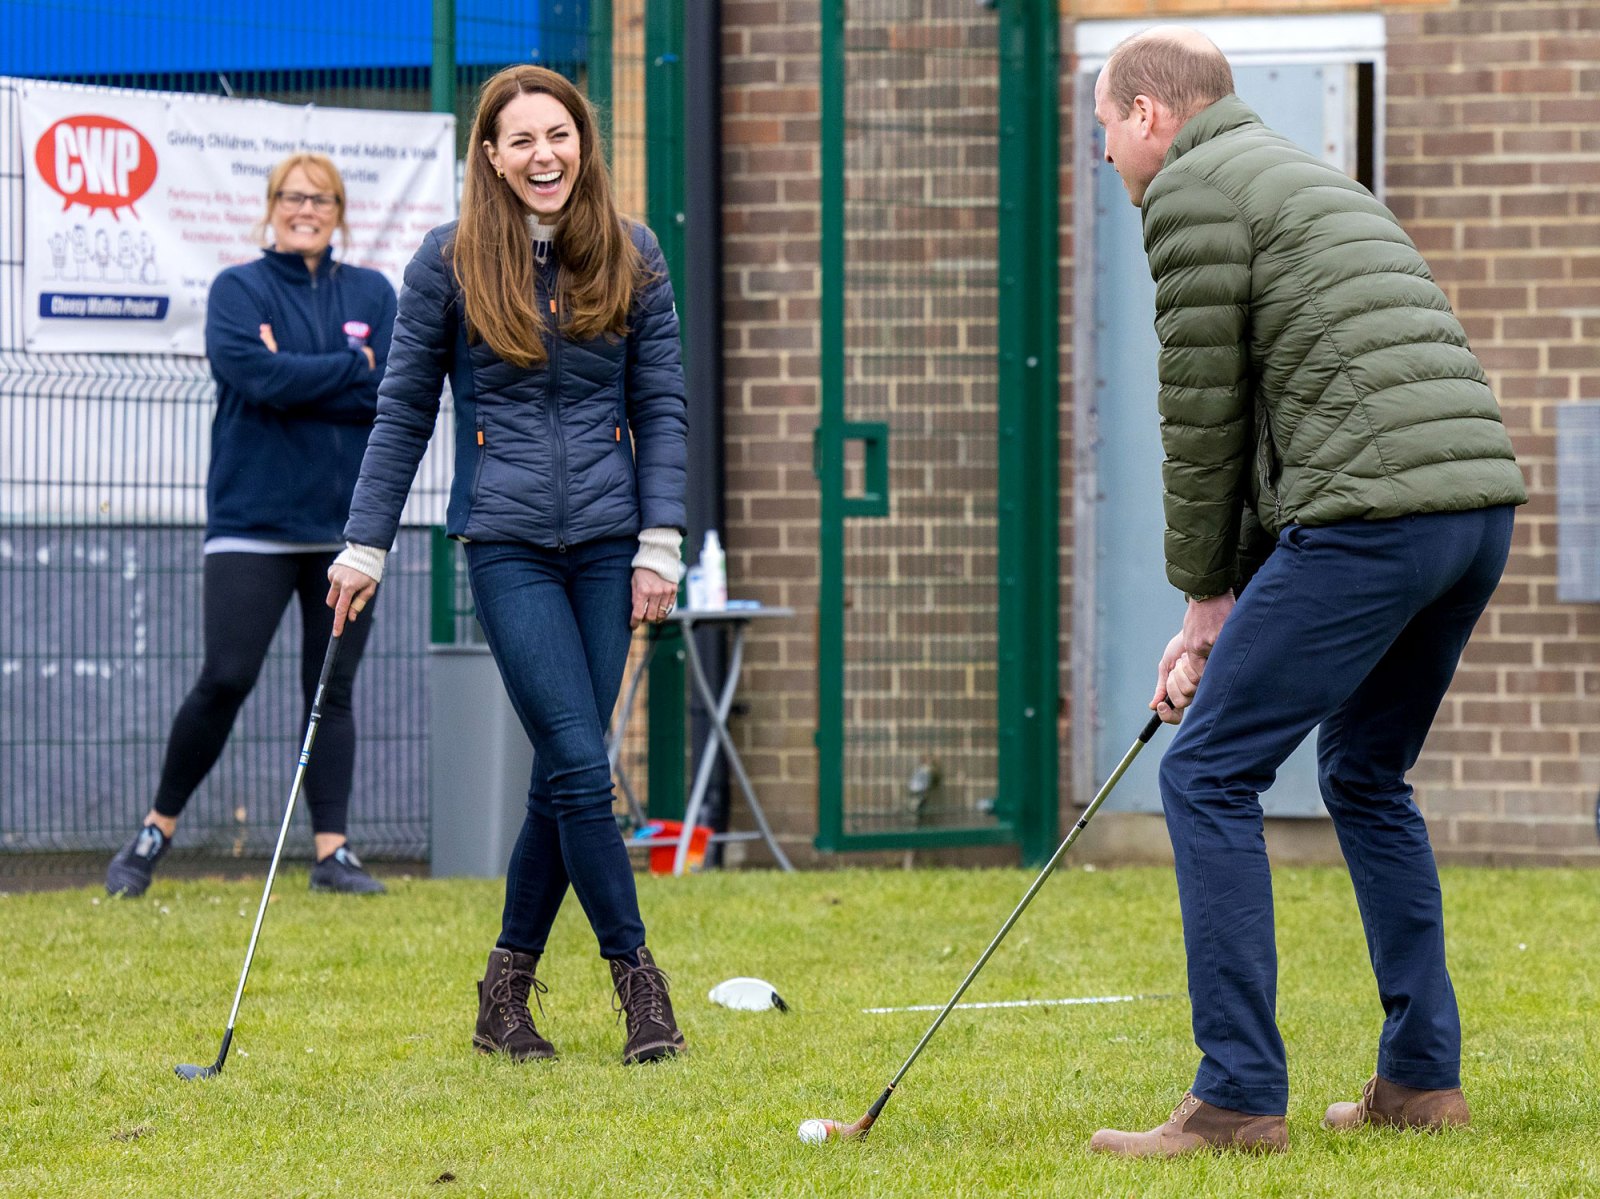 Prince William Kate Have Laugh Over Their Golfing Fail Durham